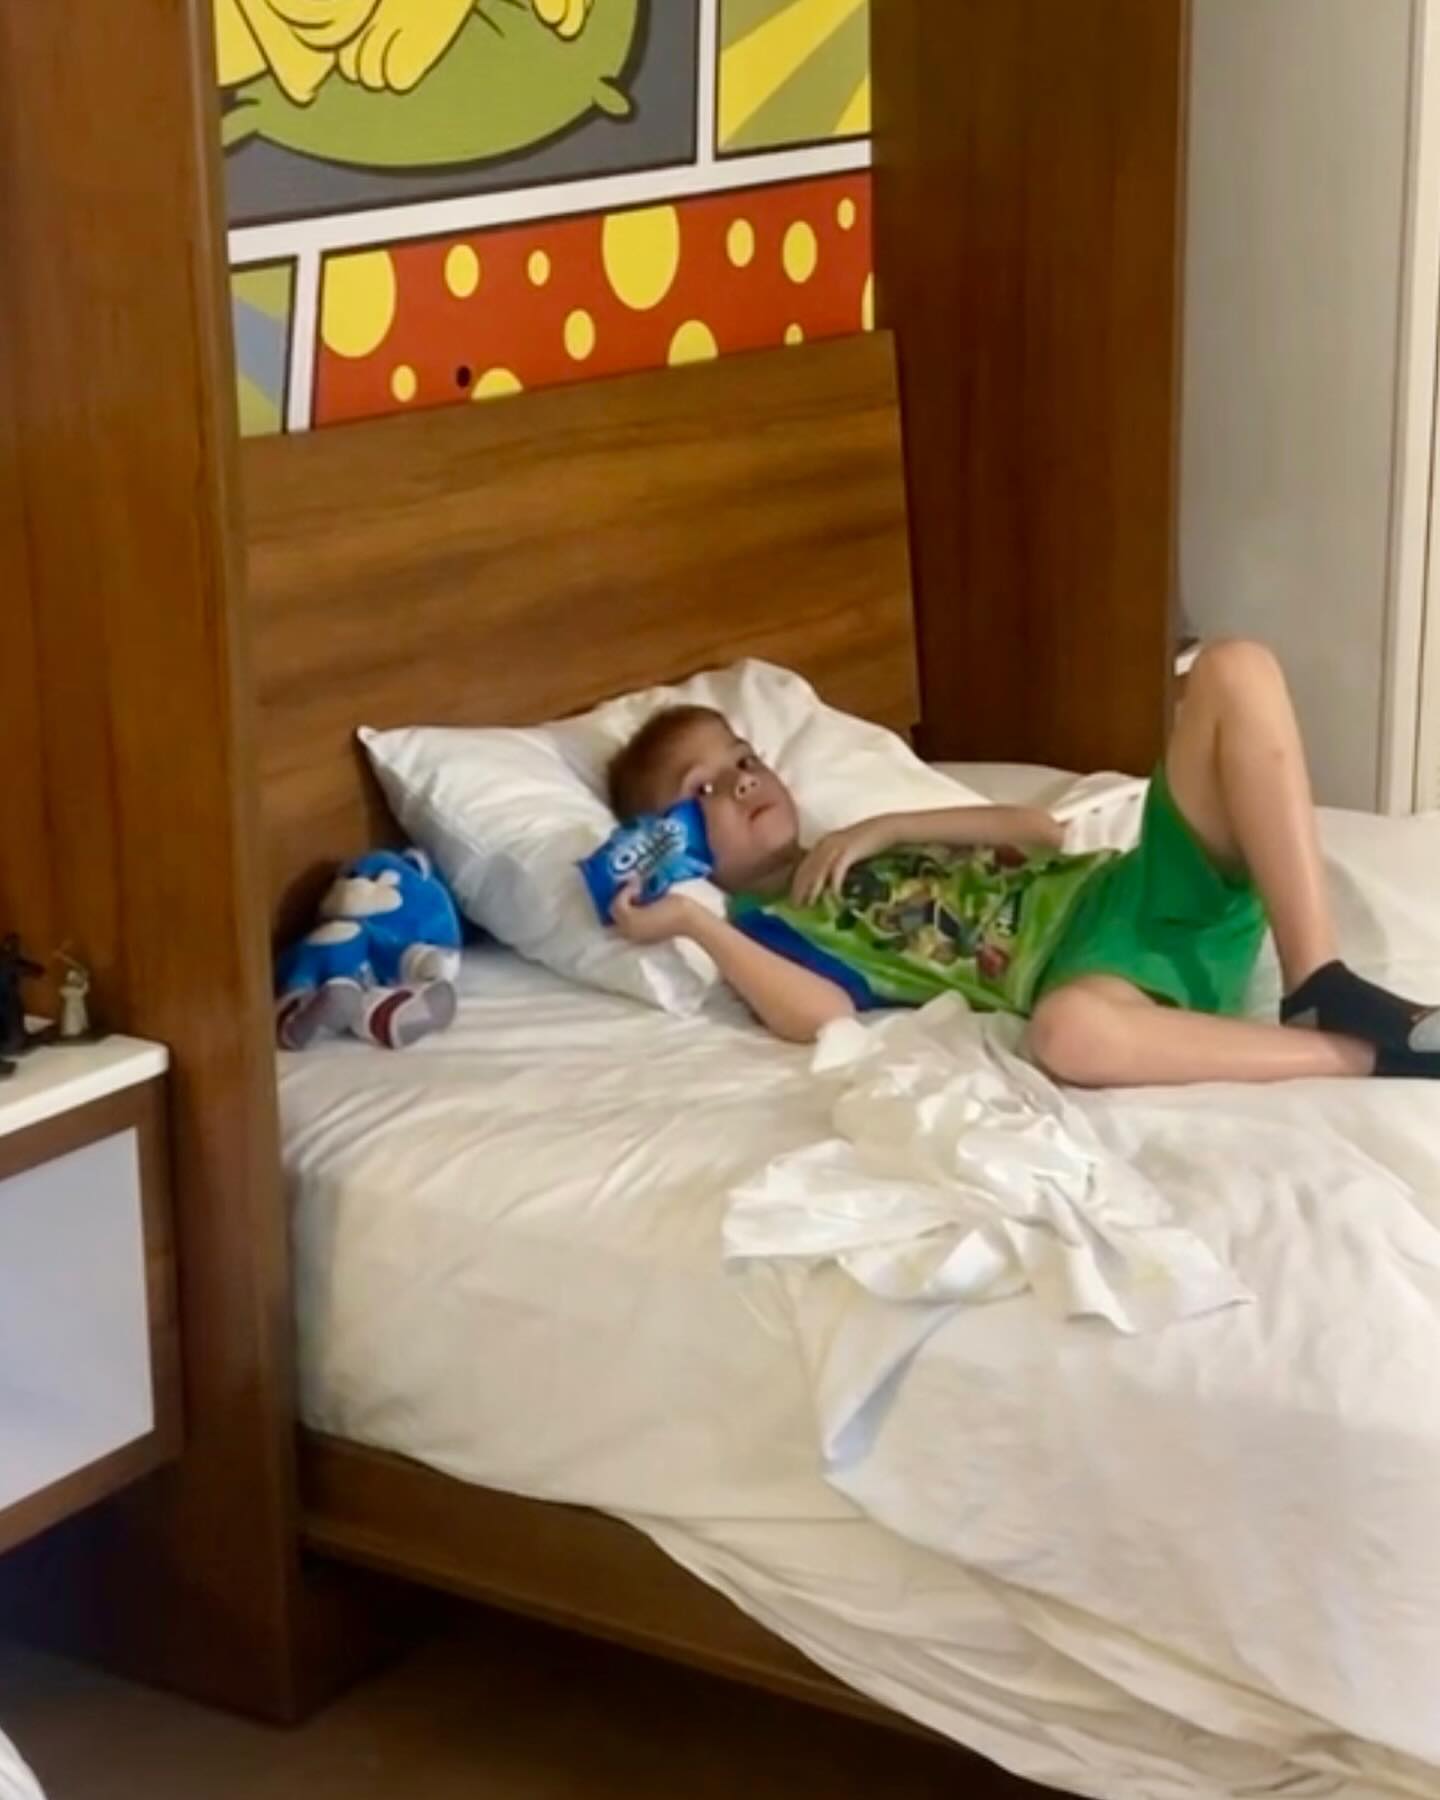 Disney’s Pop Century…It was an excellent way to celebrate Lukas’s 7th birthday. 🥳 YouTube video coming soon! 
#popcentury #disney #disneypop #disneyresort #resorts #travel #amputeelife #amputee #hotels